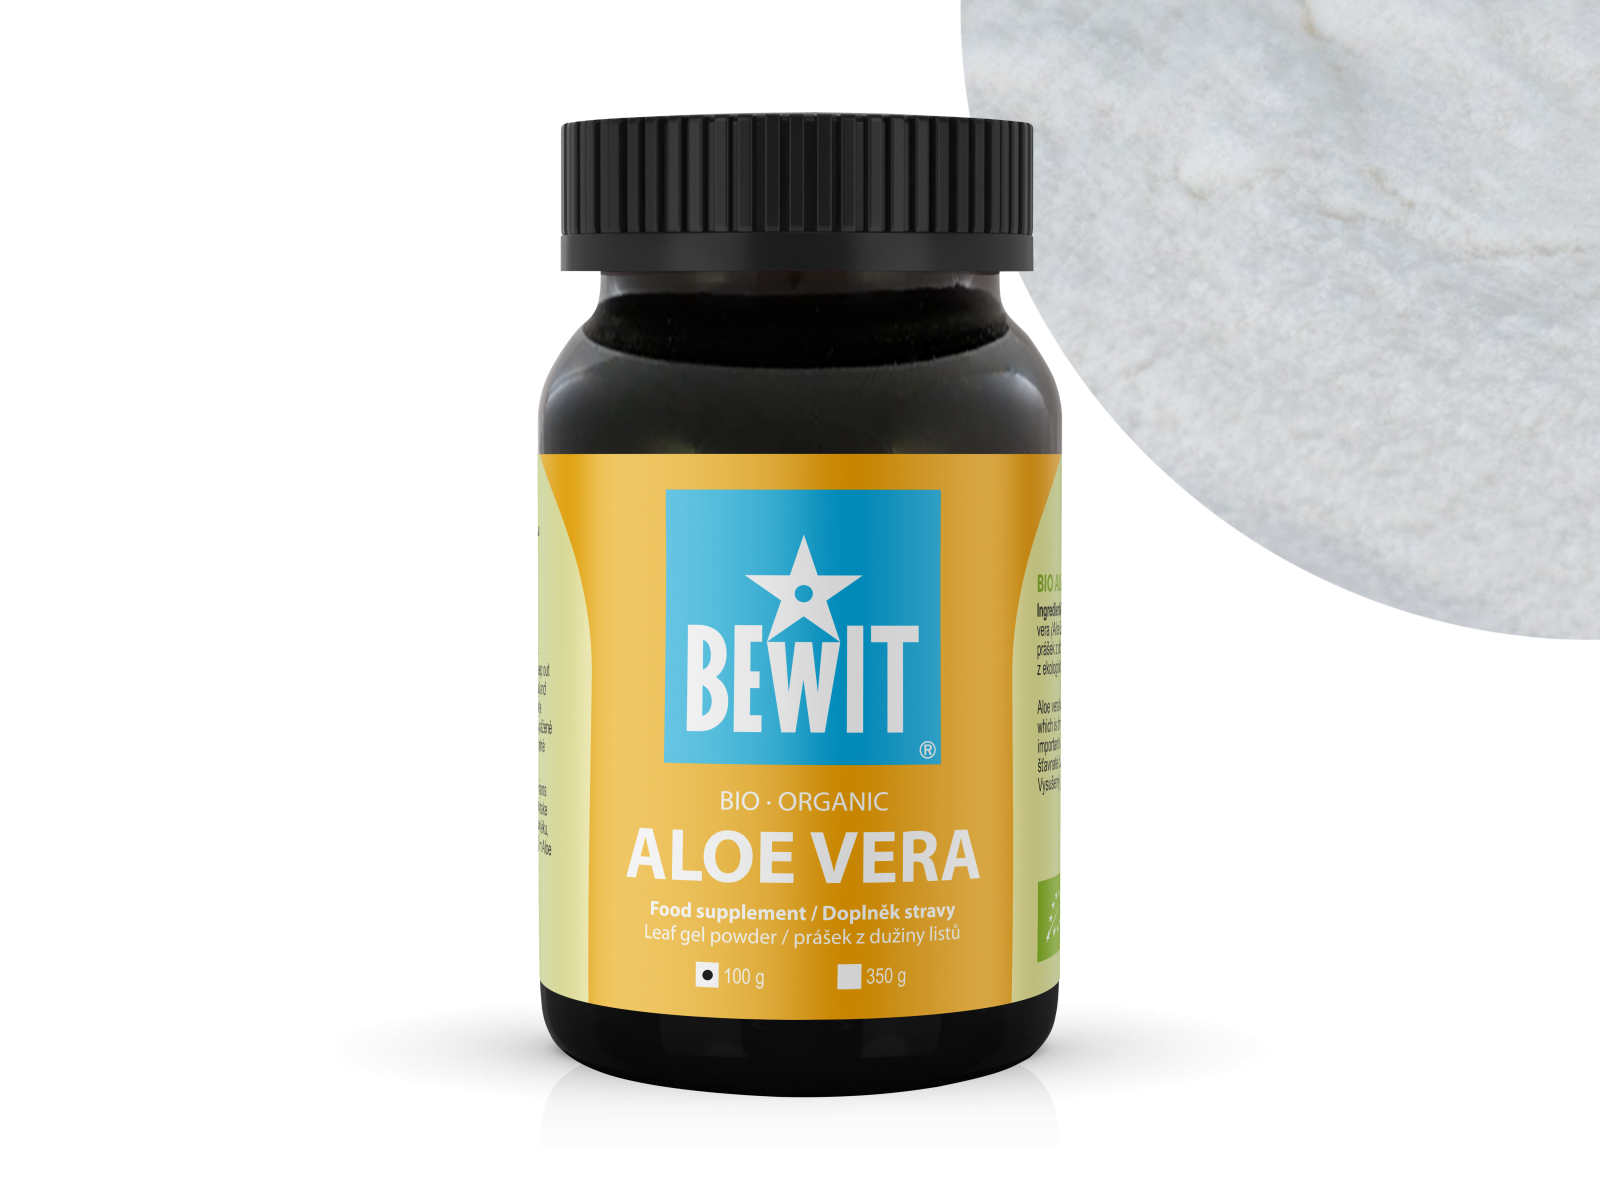 ORGANIC ALOE VERA - This leaf pulp powder, made from Aloe vera, is a highly effective food supplement